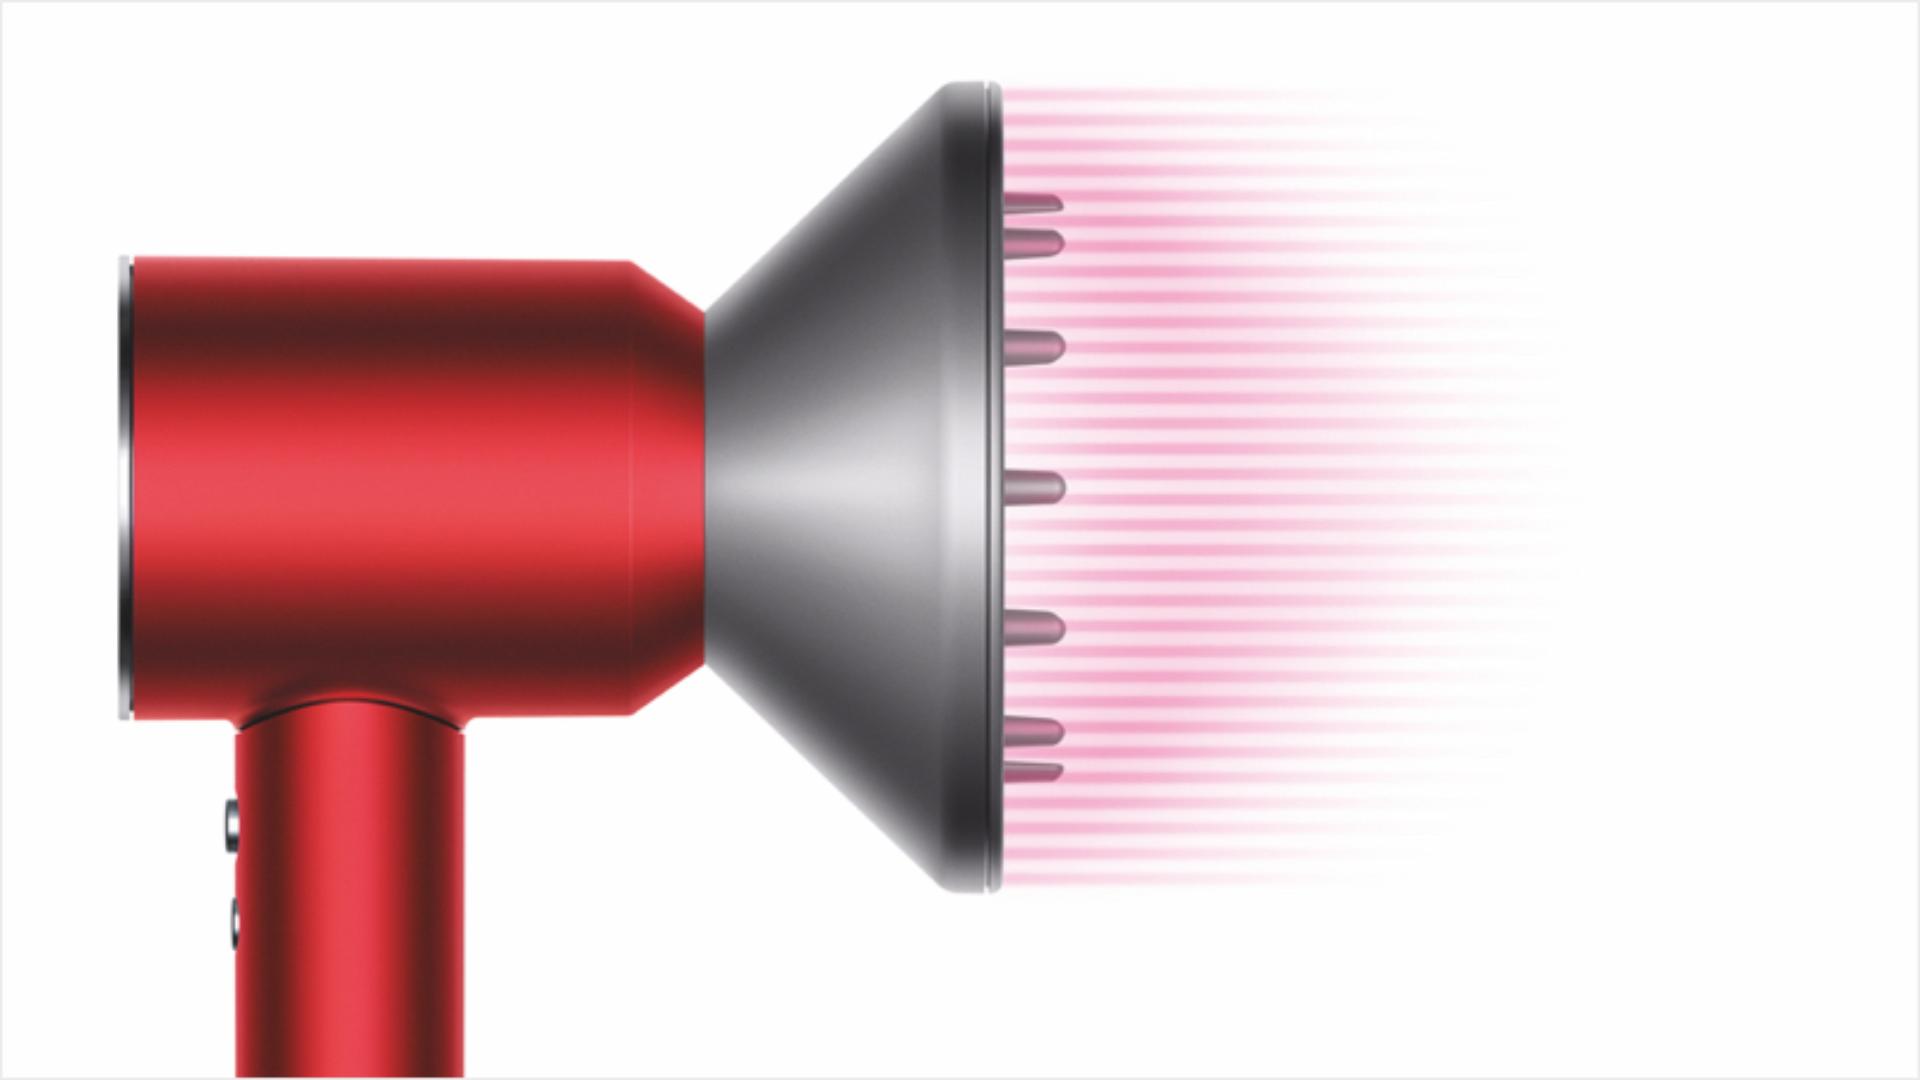 Dyson Supersonic™ hair dryer with re-engineered Diffuser attachment